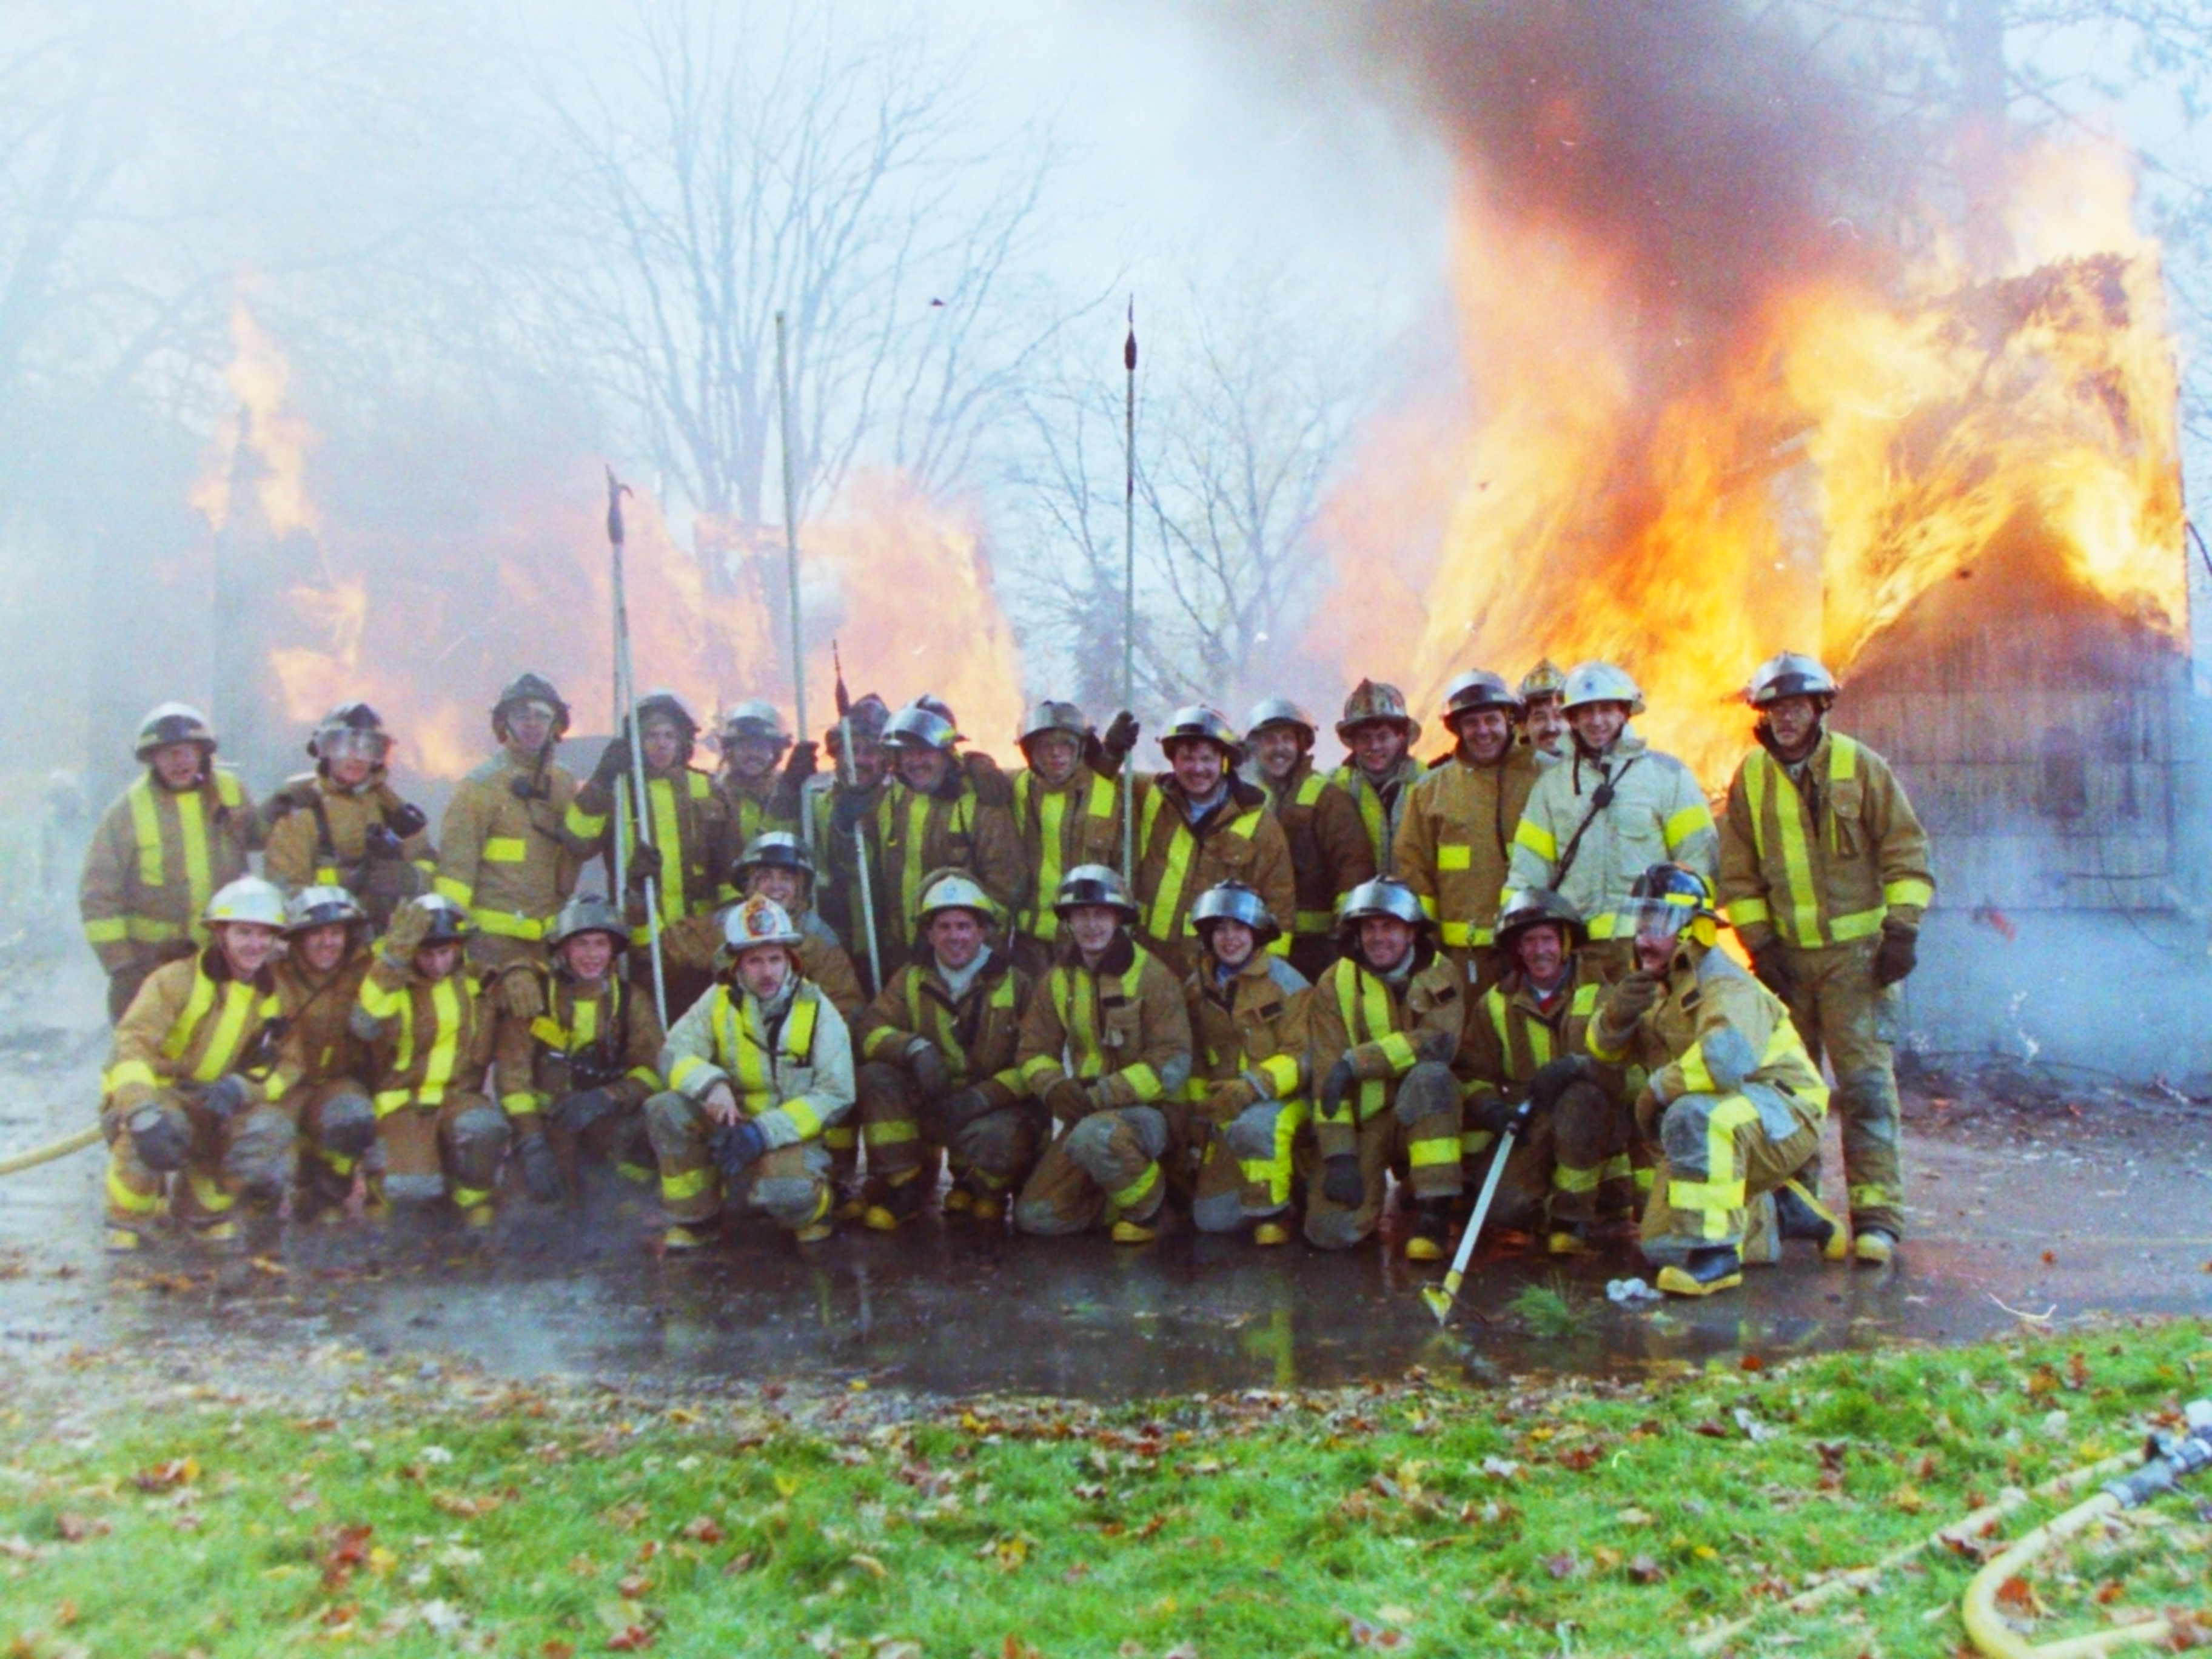 11-20-92  Other - Endwell Fire 5